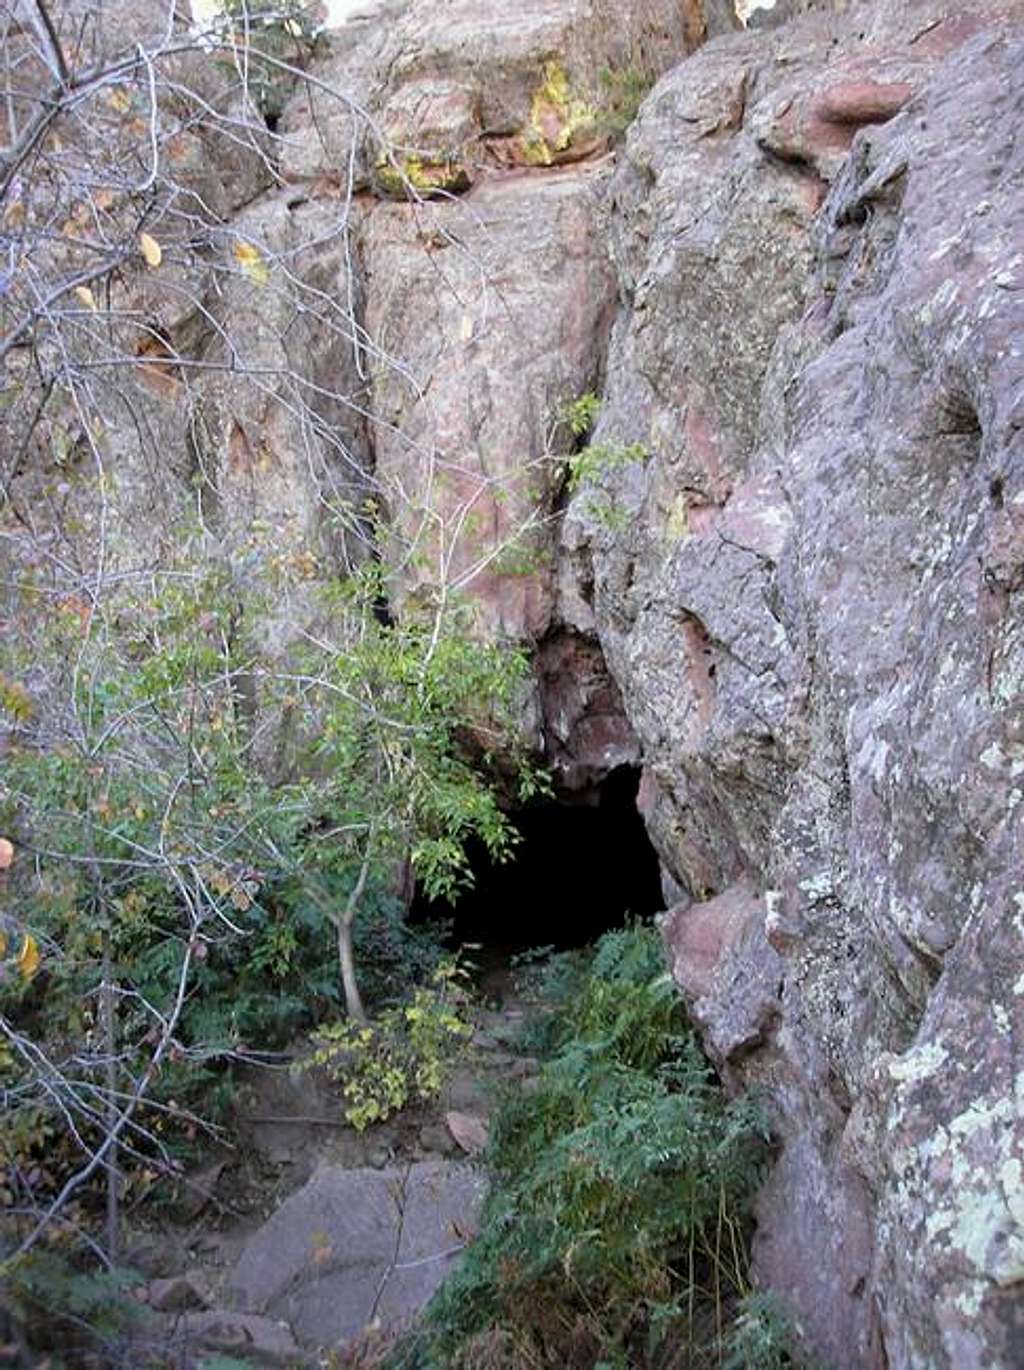 The entrance of Mallory Cave